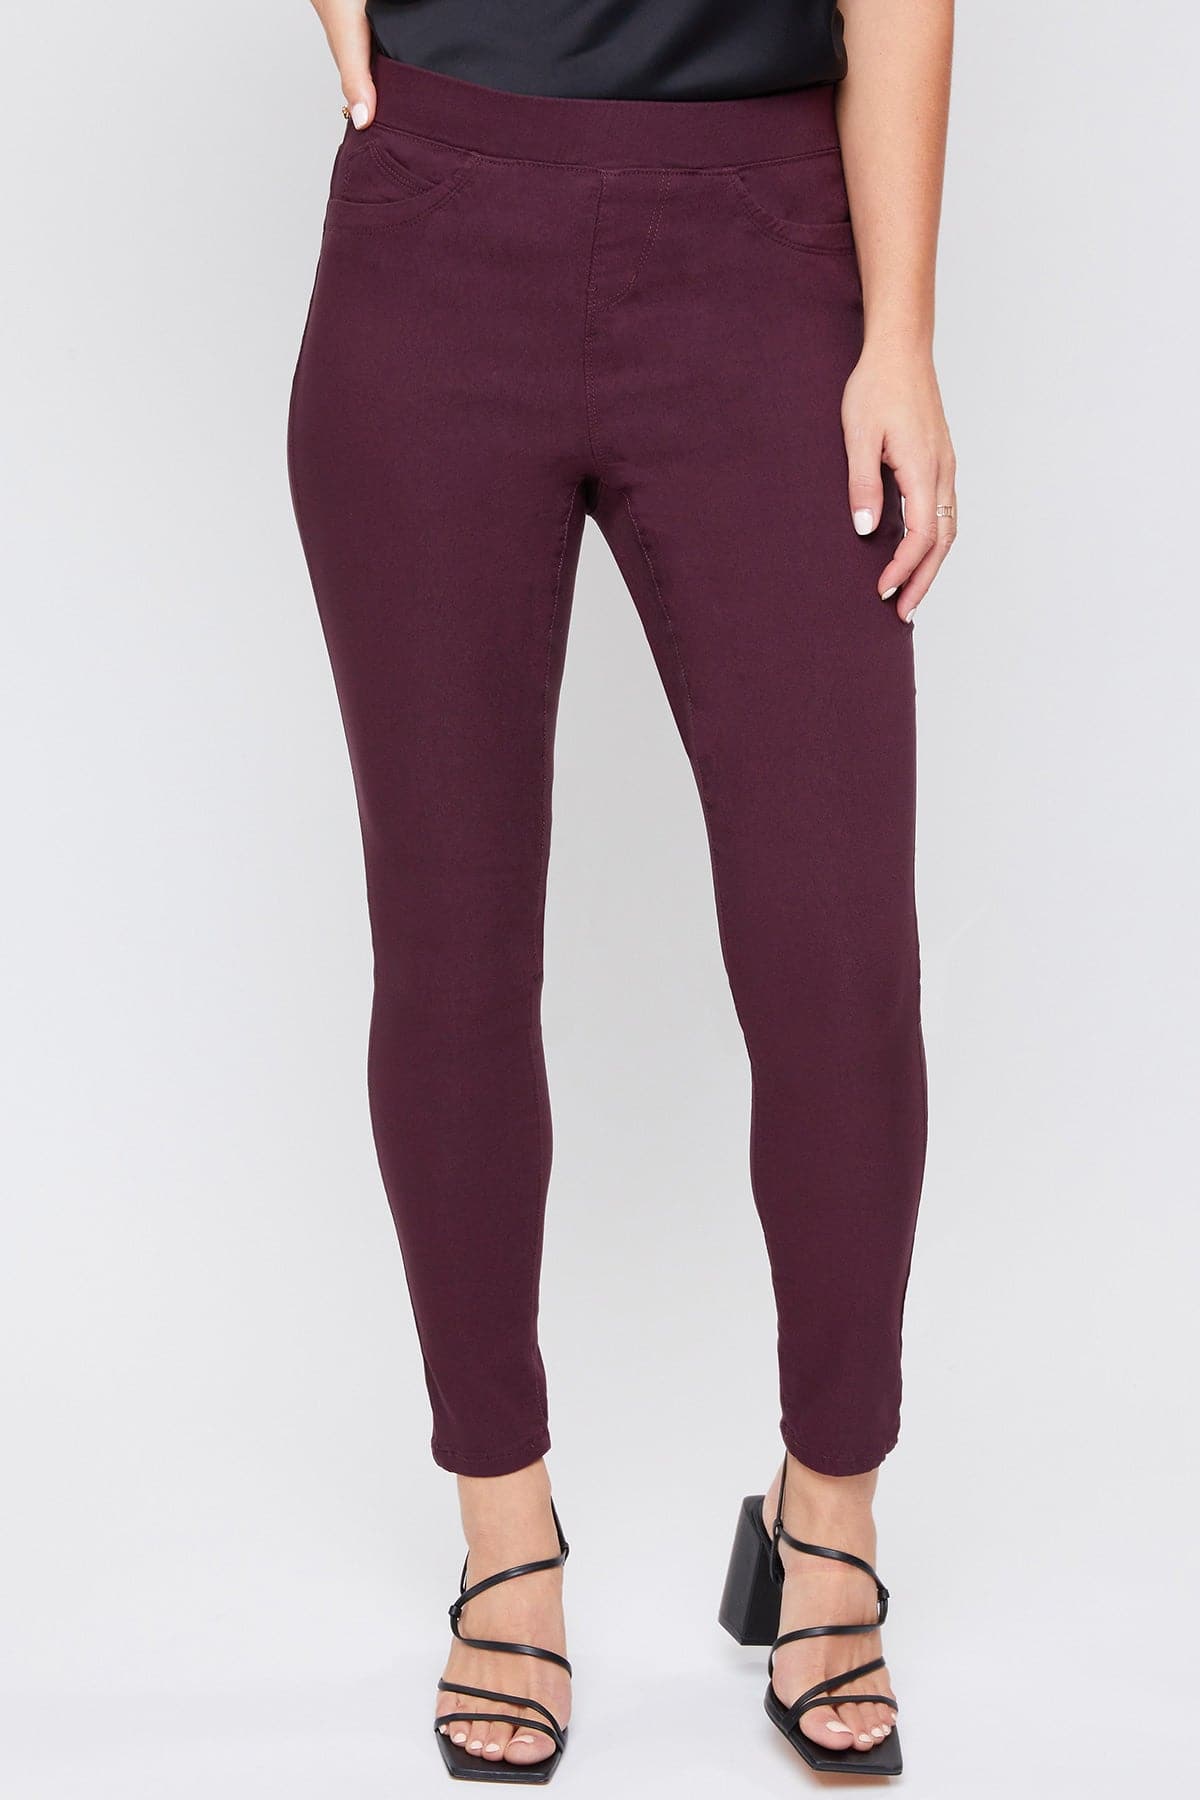 Women's Hyperstretch Mid Rise Jegging